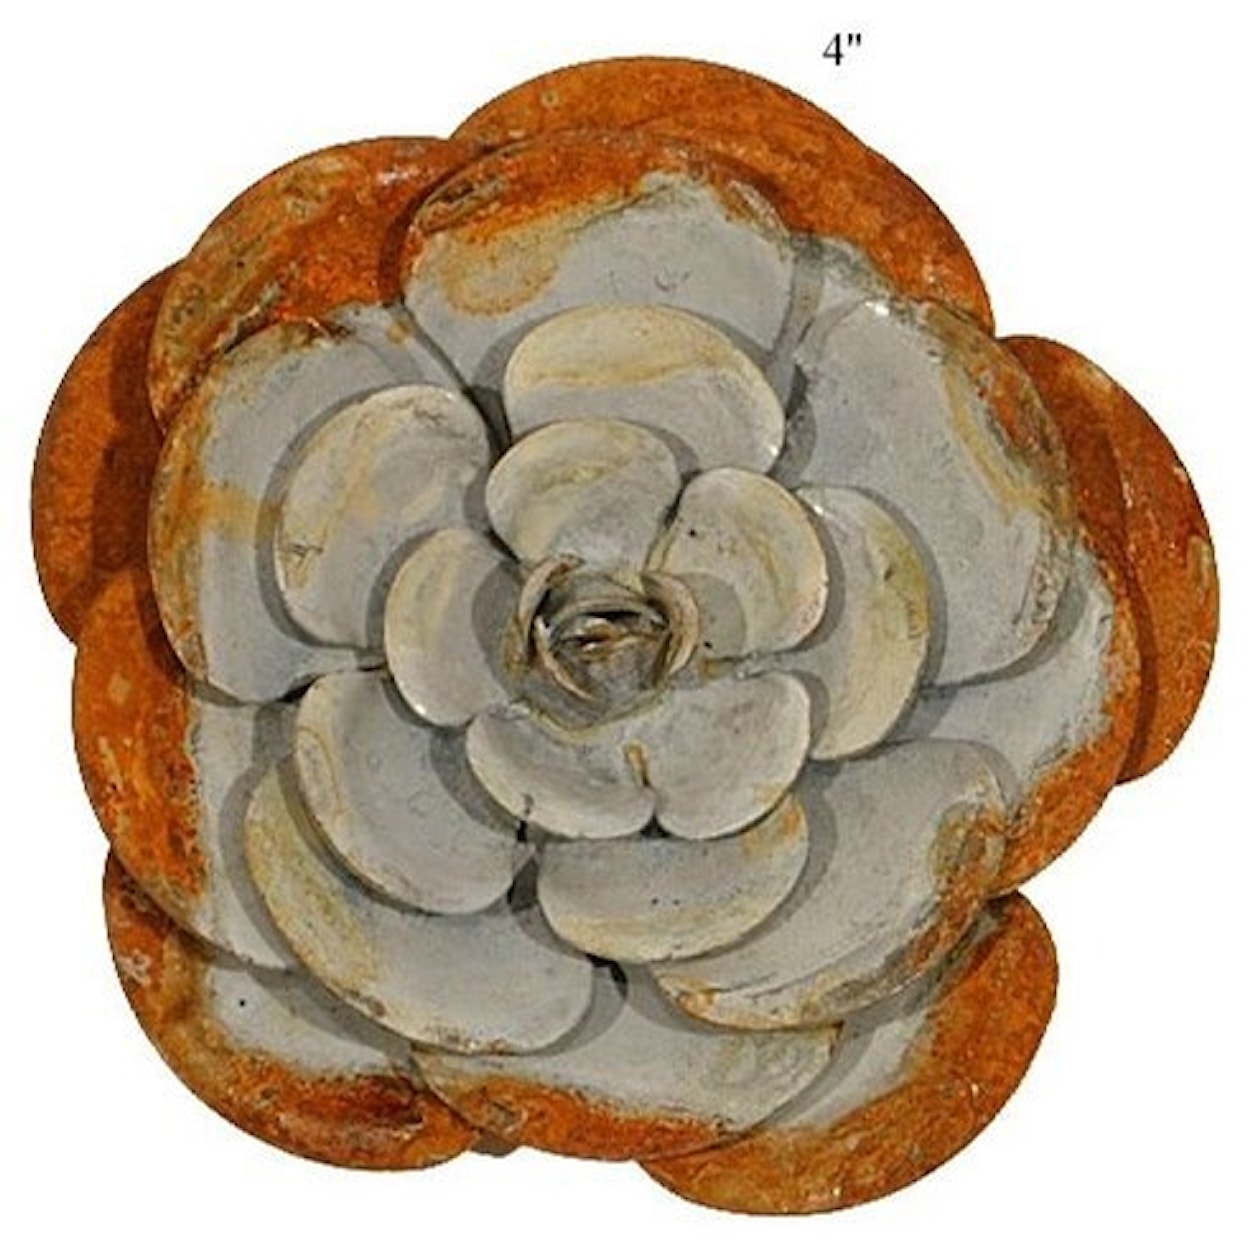 Will's Company Accents Garden Rose Magnet - 4"